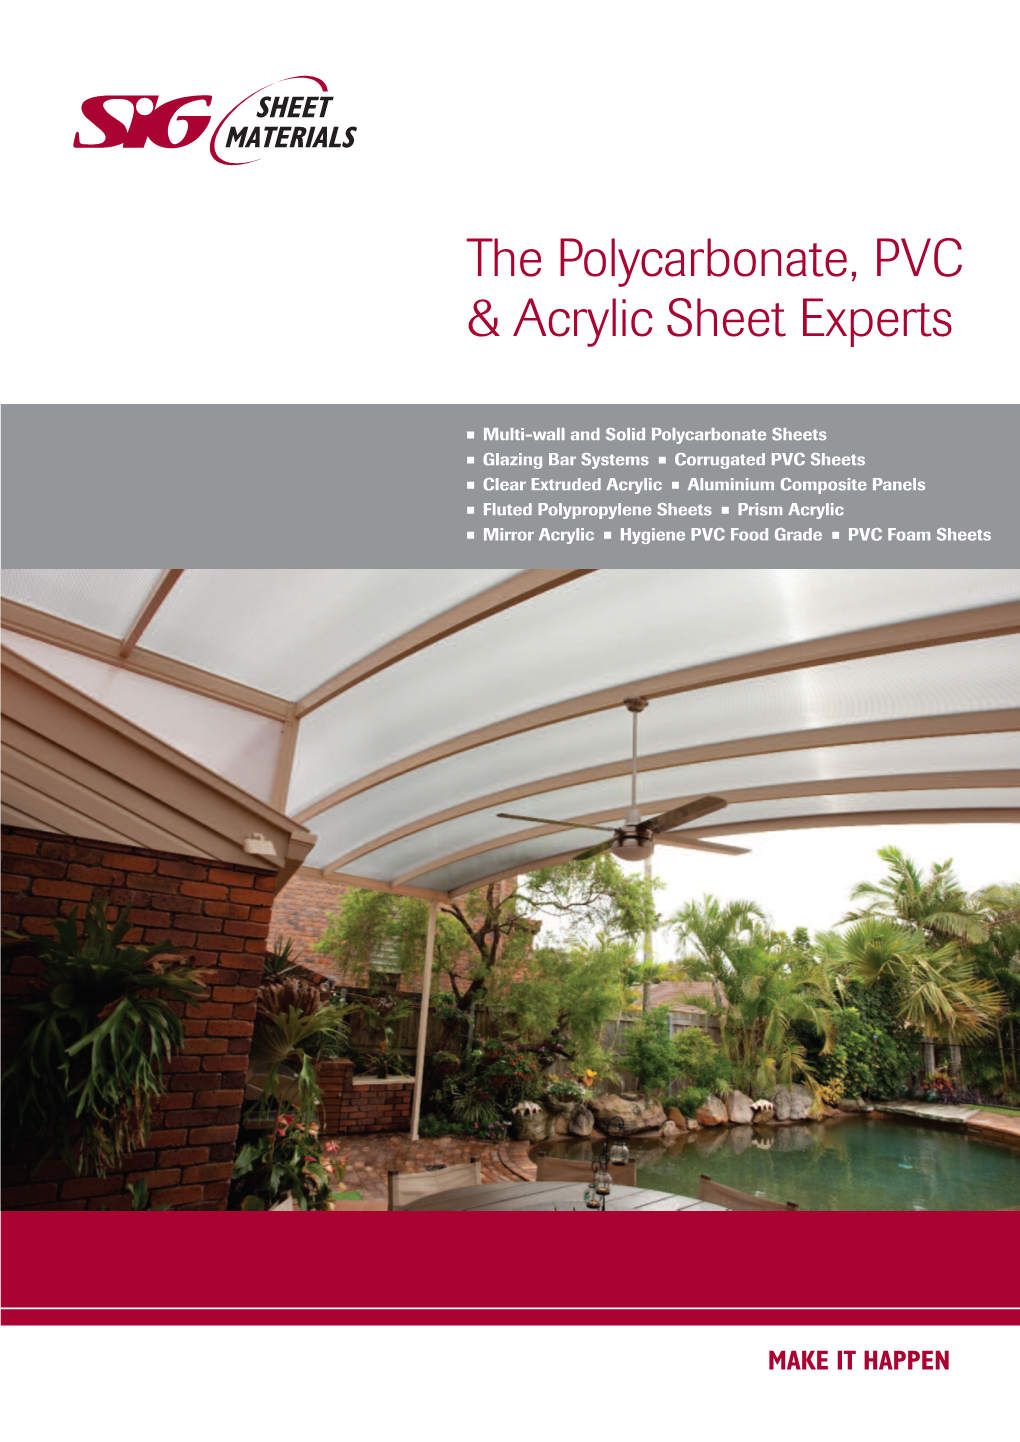 The Polycarbonate, PVC & Acrylic Sheet Experts